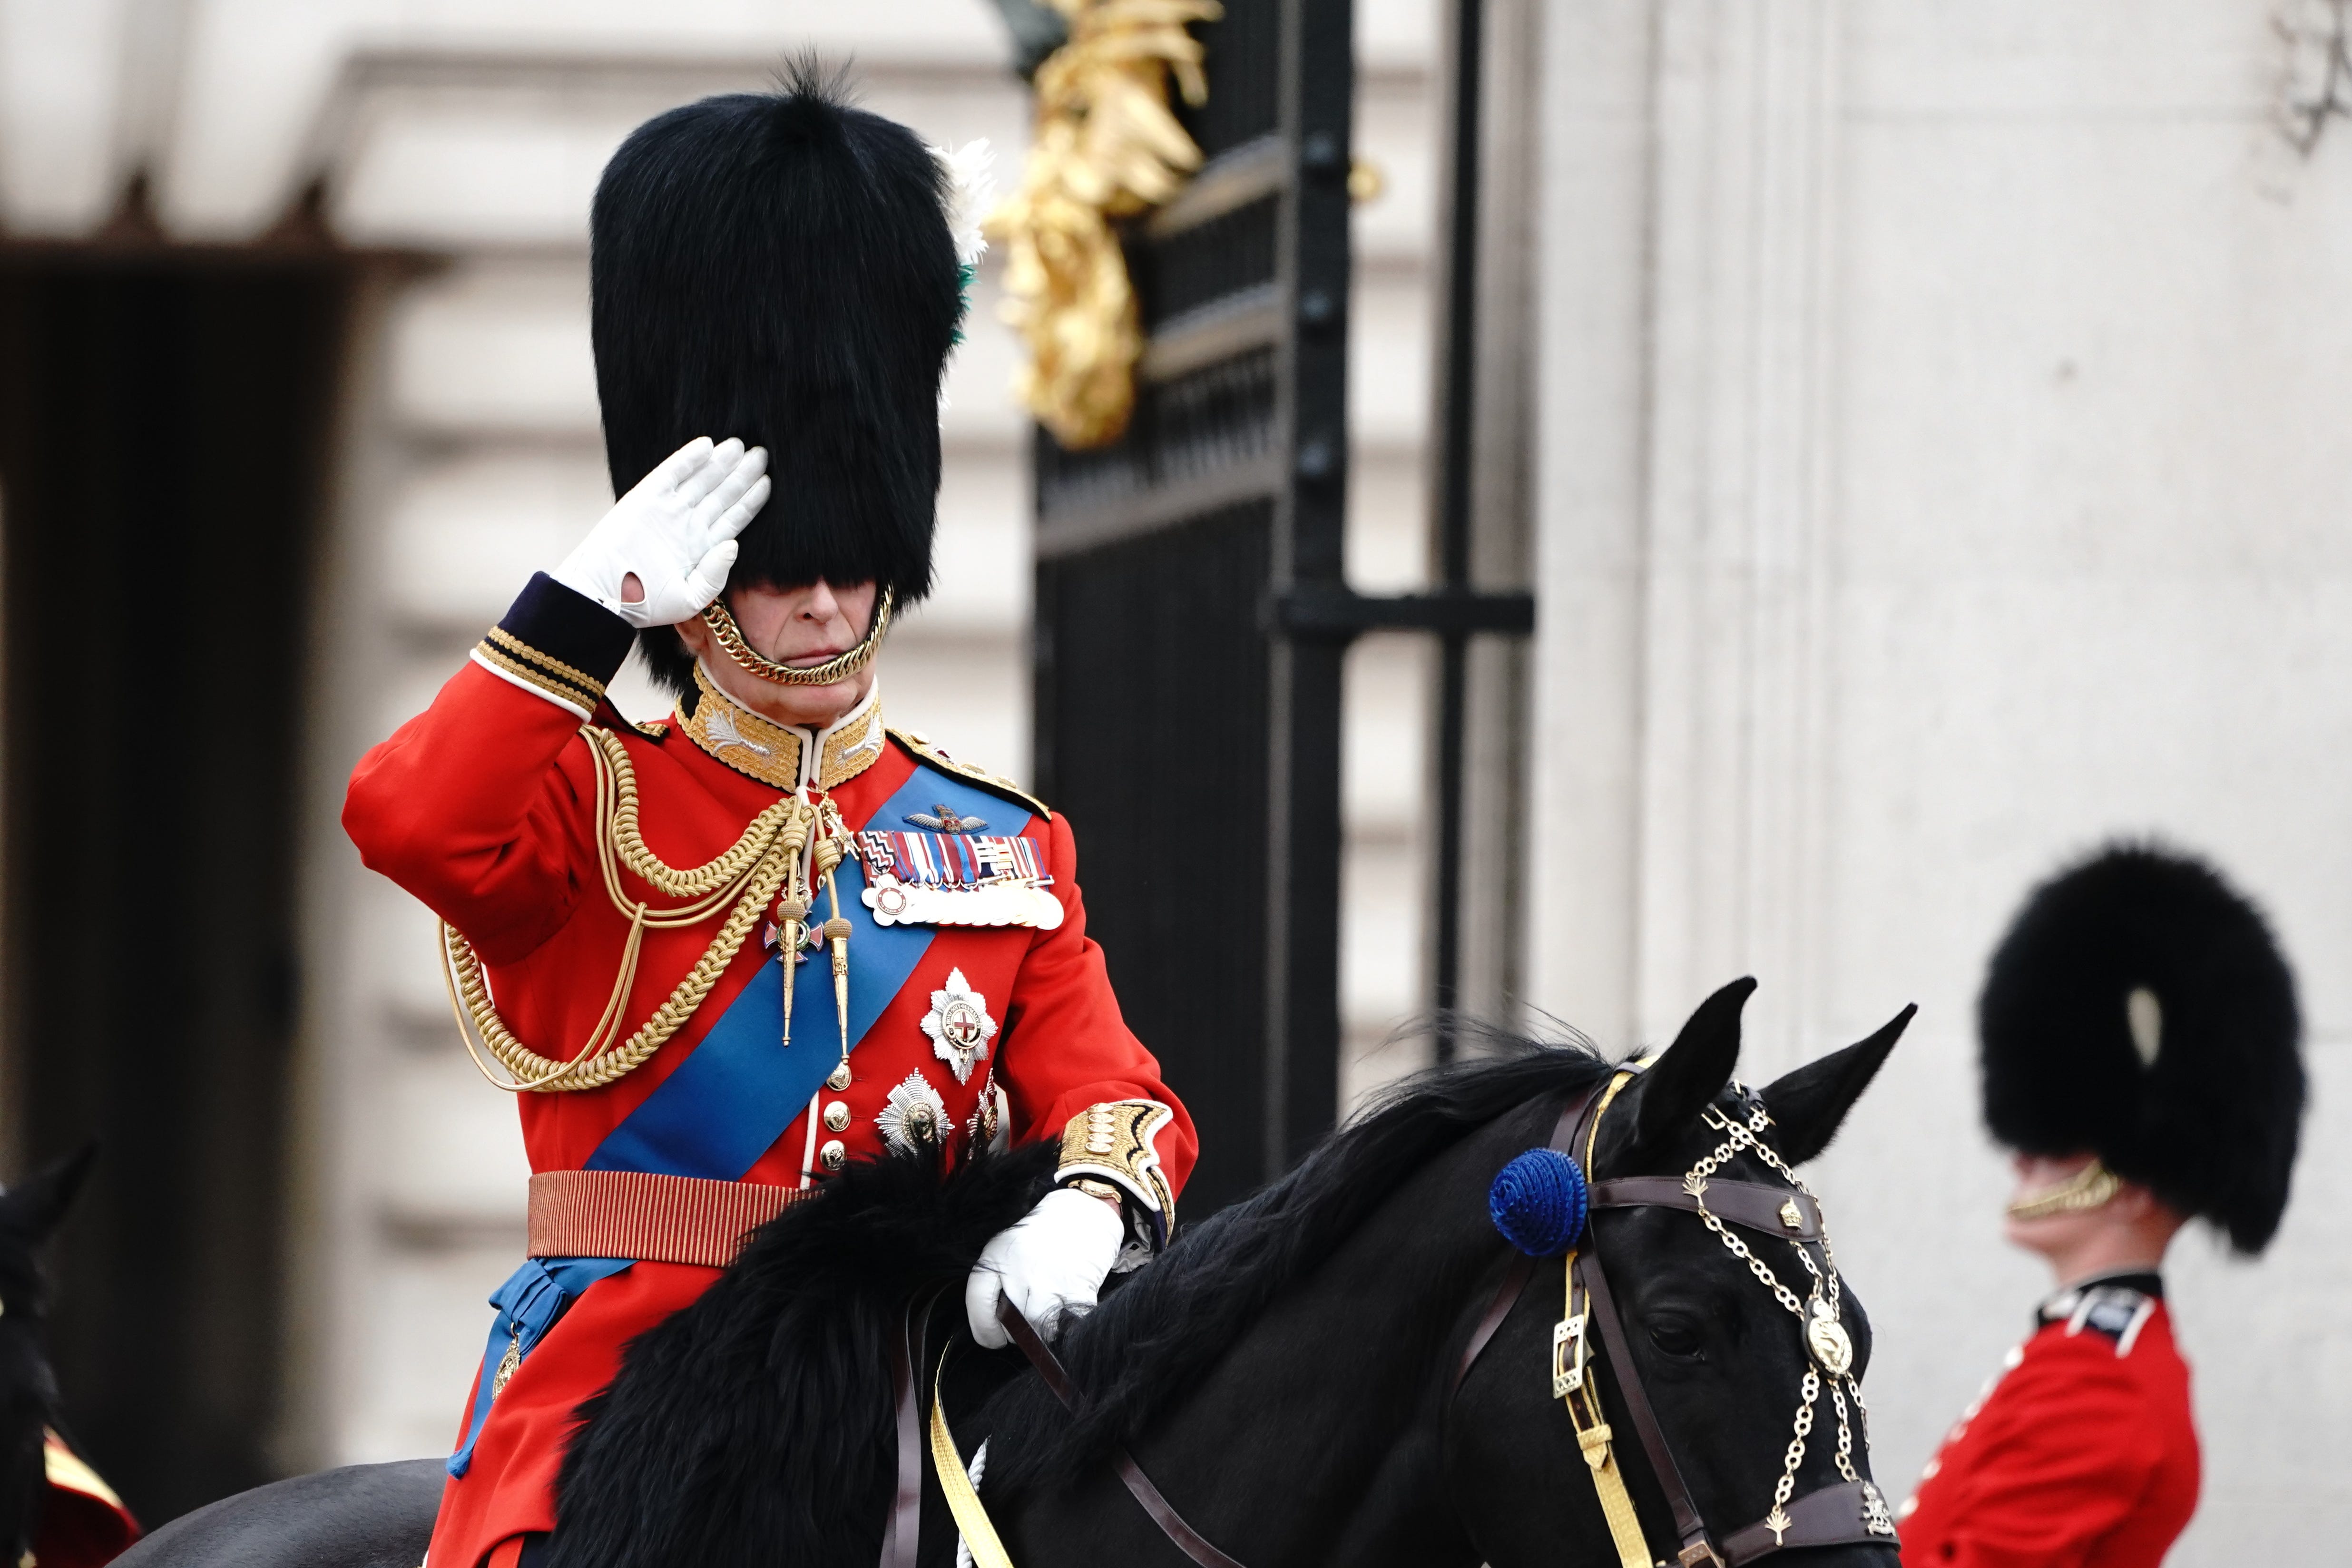 King takes part in first Trooping the Colour ceremony as monarch The